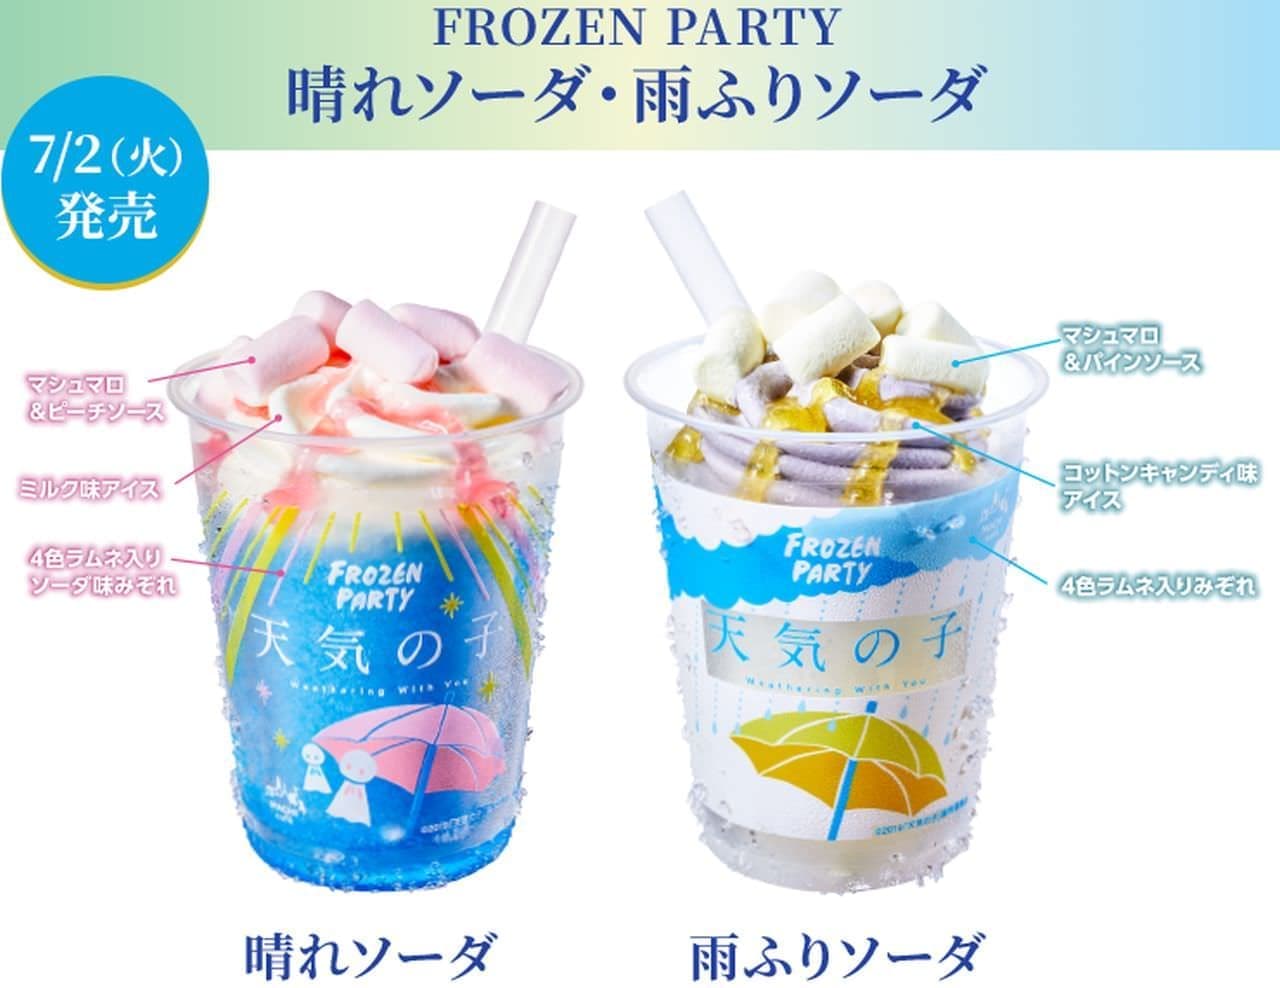 Lawson "Machi Cafe Frozen Party Sunny Soda" and "Machi Cafe Frozen Party Rain Pretend Soda"